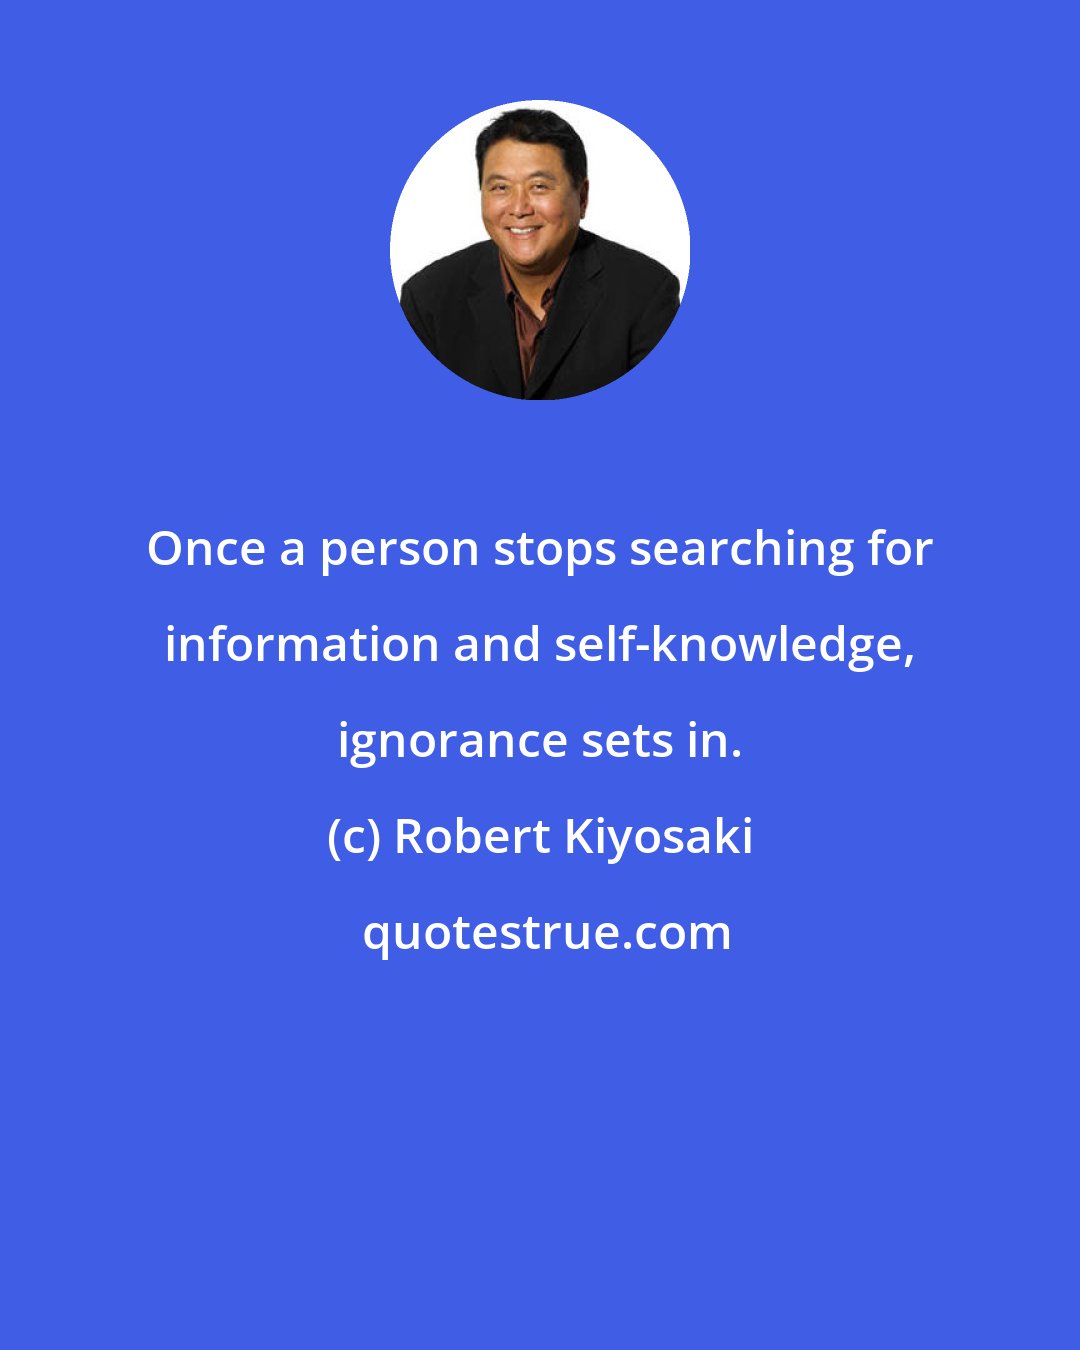 Robert Kiyosaki: Once a person stops searching for information and self-knowledge, ignorance sets in.